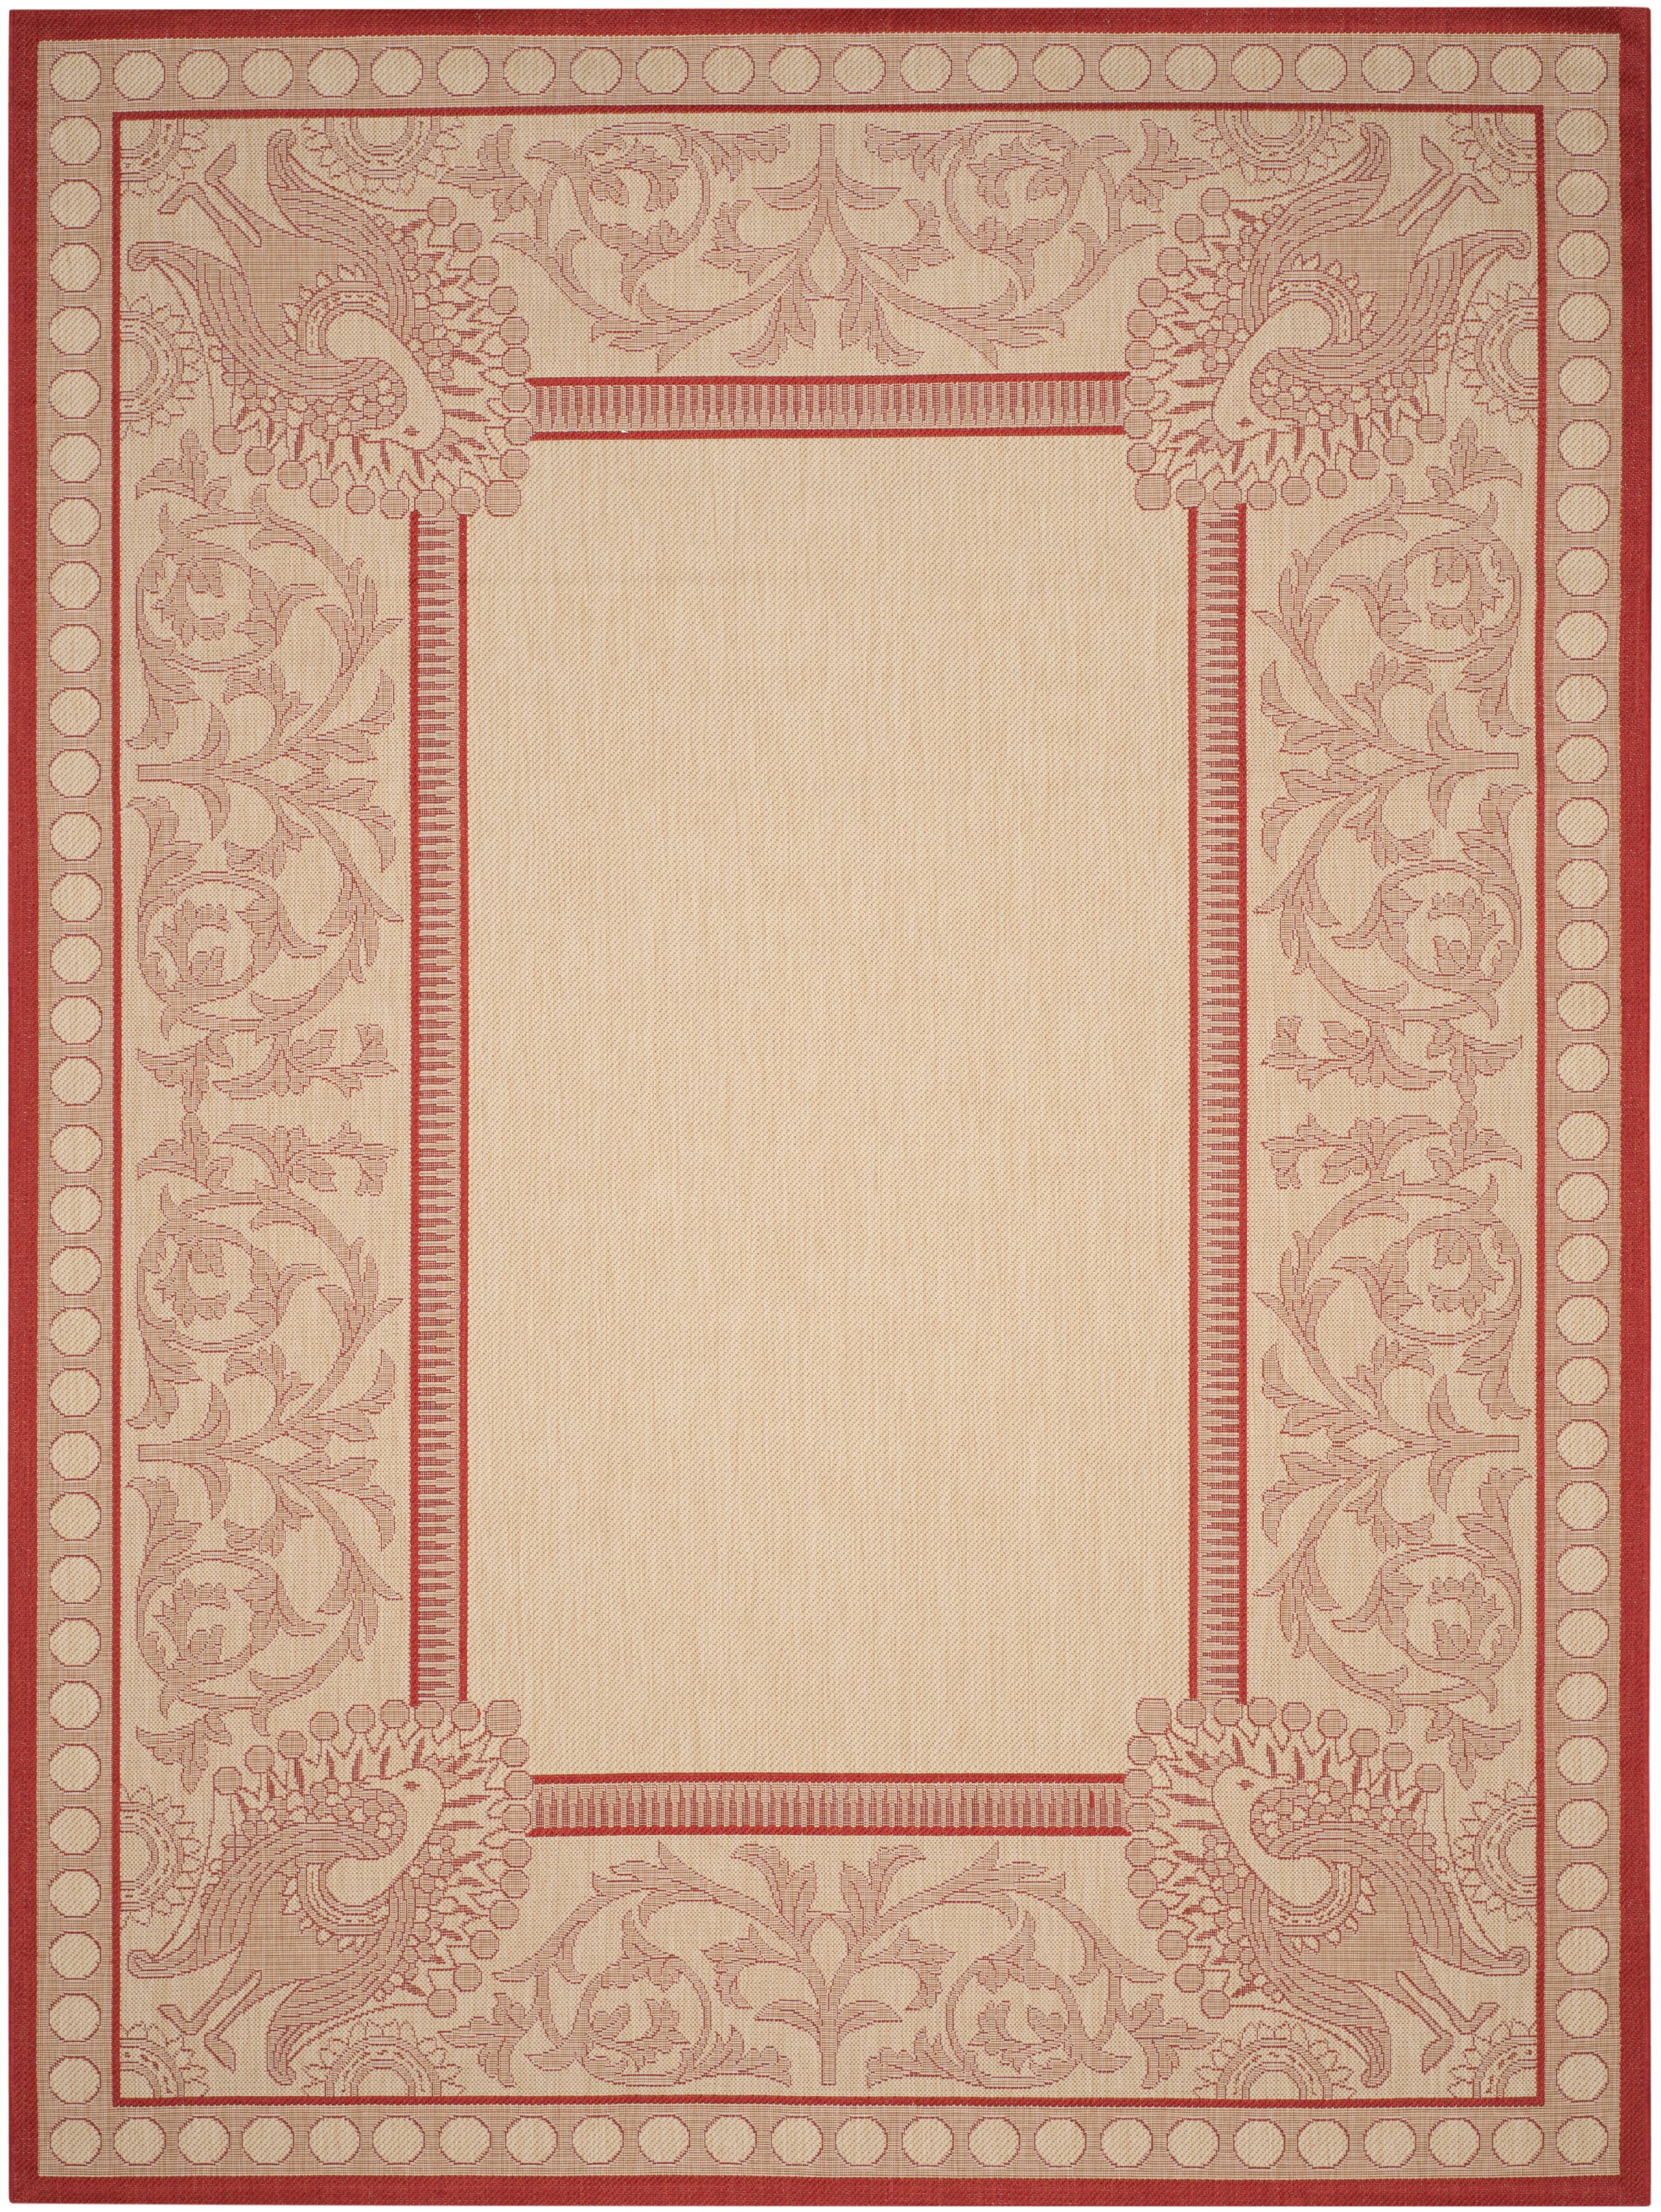 SAFAVIEH Courtyard Cooper Floral Indoor/Outdoor Area Rug, 6'7" x 6'7" Square, Natural/Red - image 2 of 7